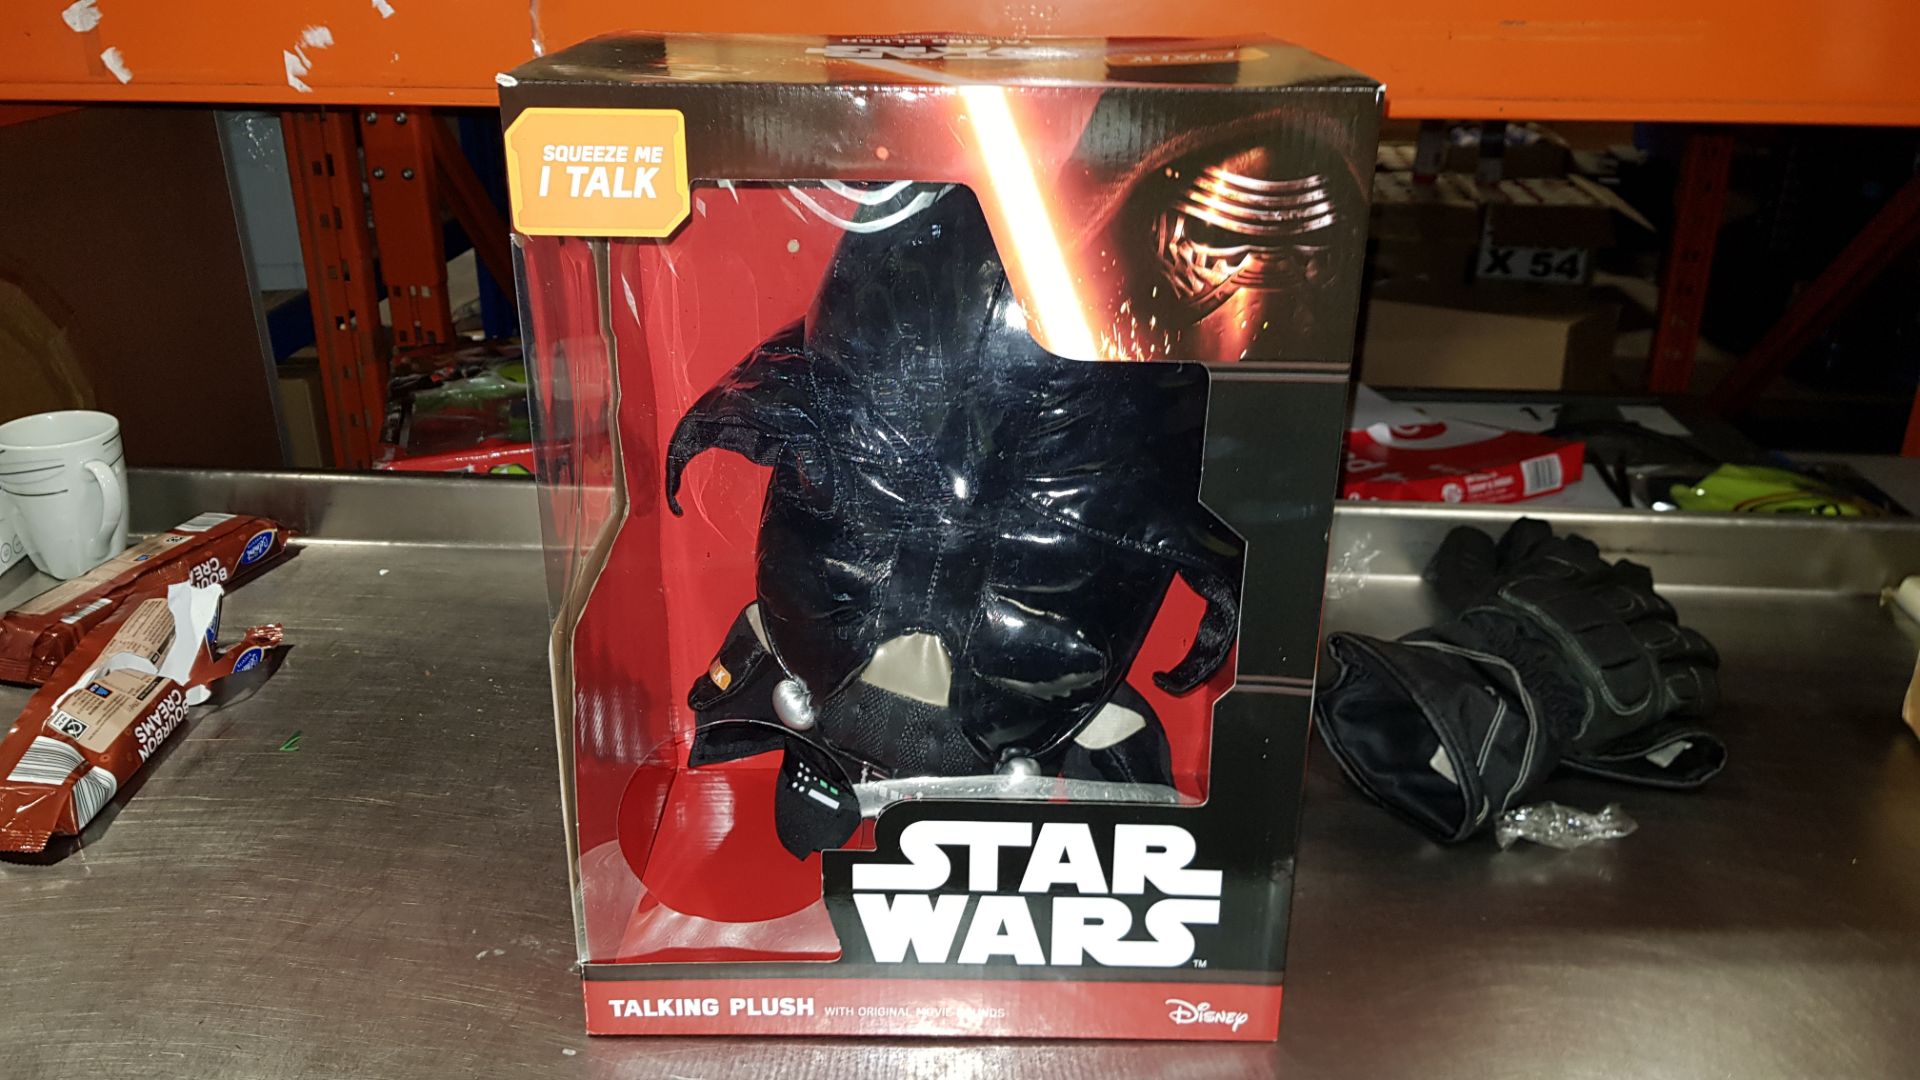 8 X BRAND NEW BOXED DISNEY STAR WARS DARTH VADER TALKING PLUSH WITH ORIGINAL MOVIE SOUNDS - IN 2